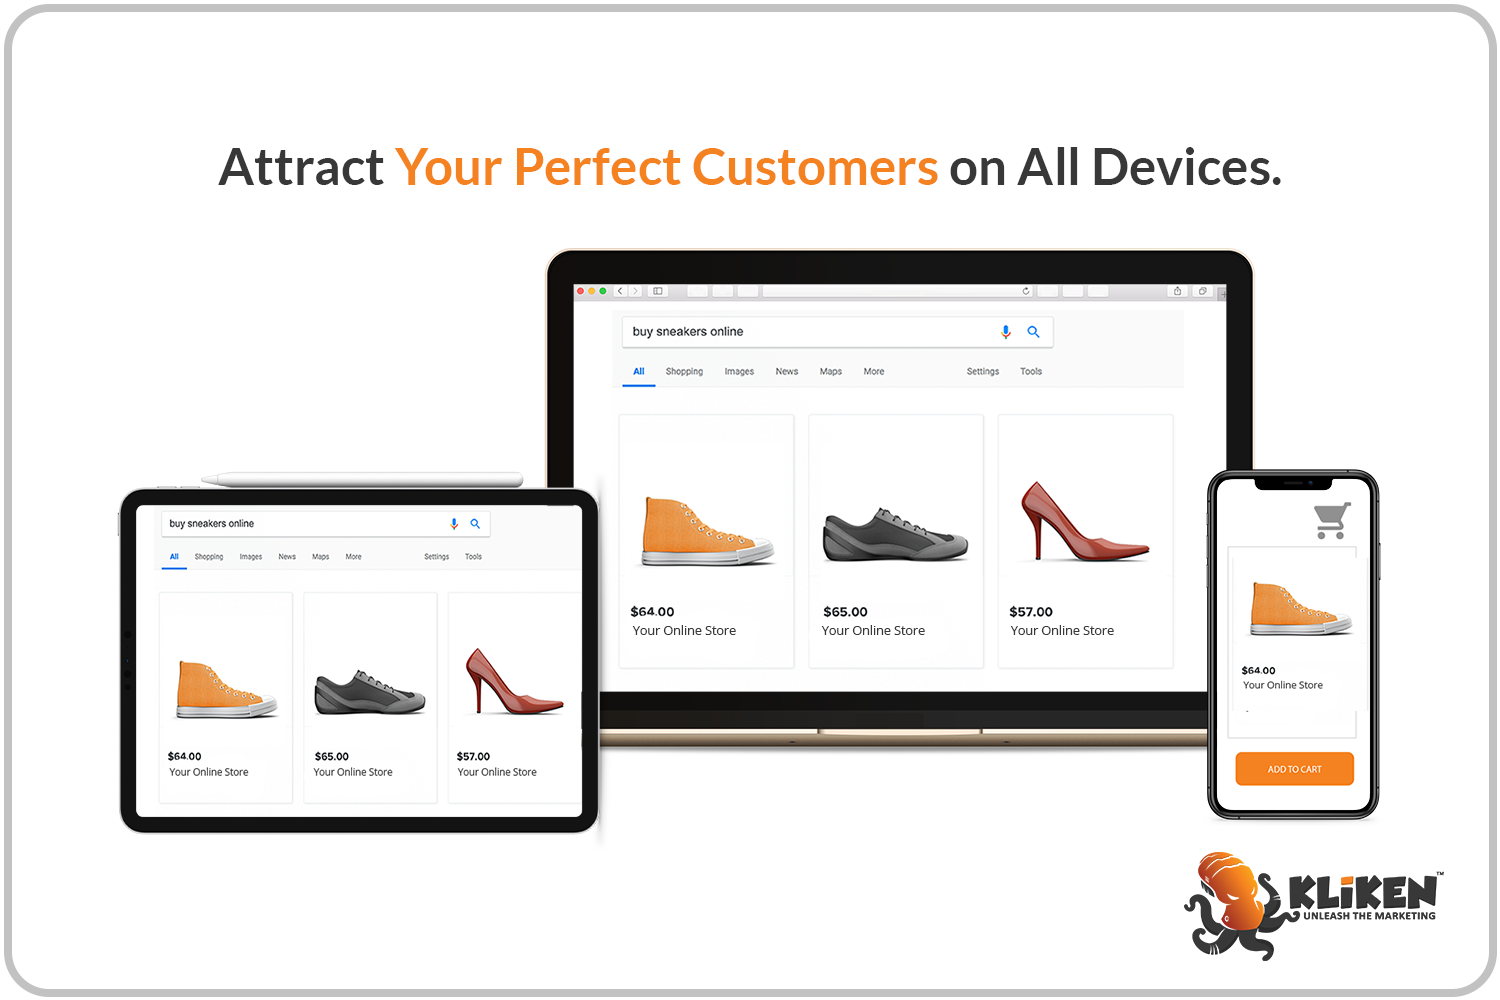 Attract your perfect customers across all devices